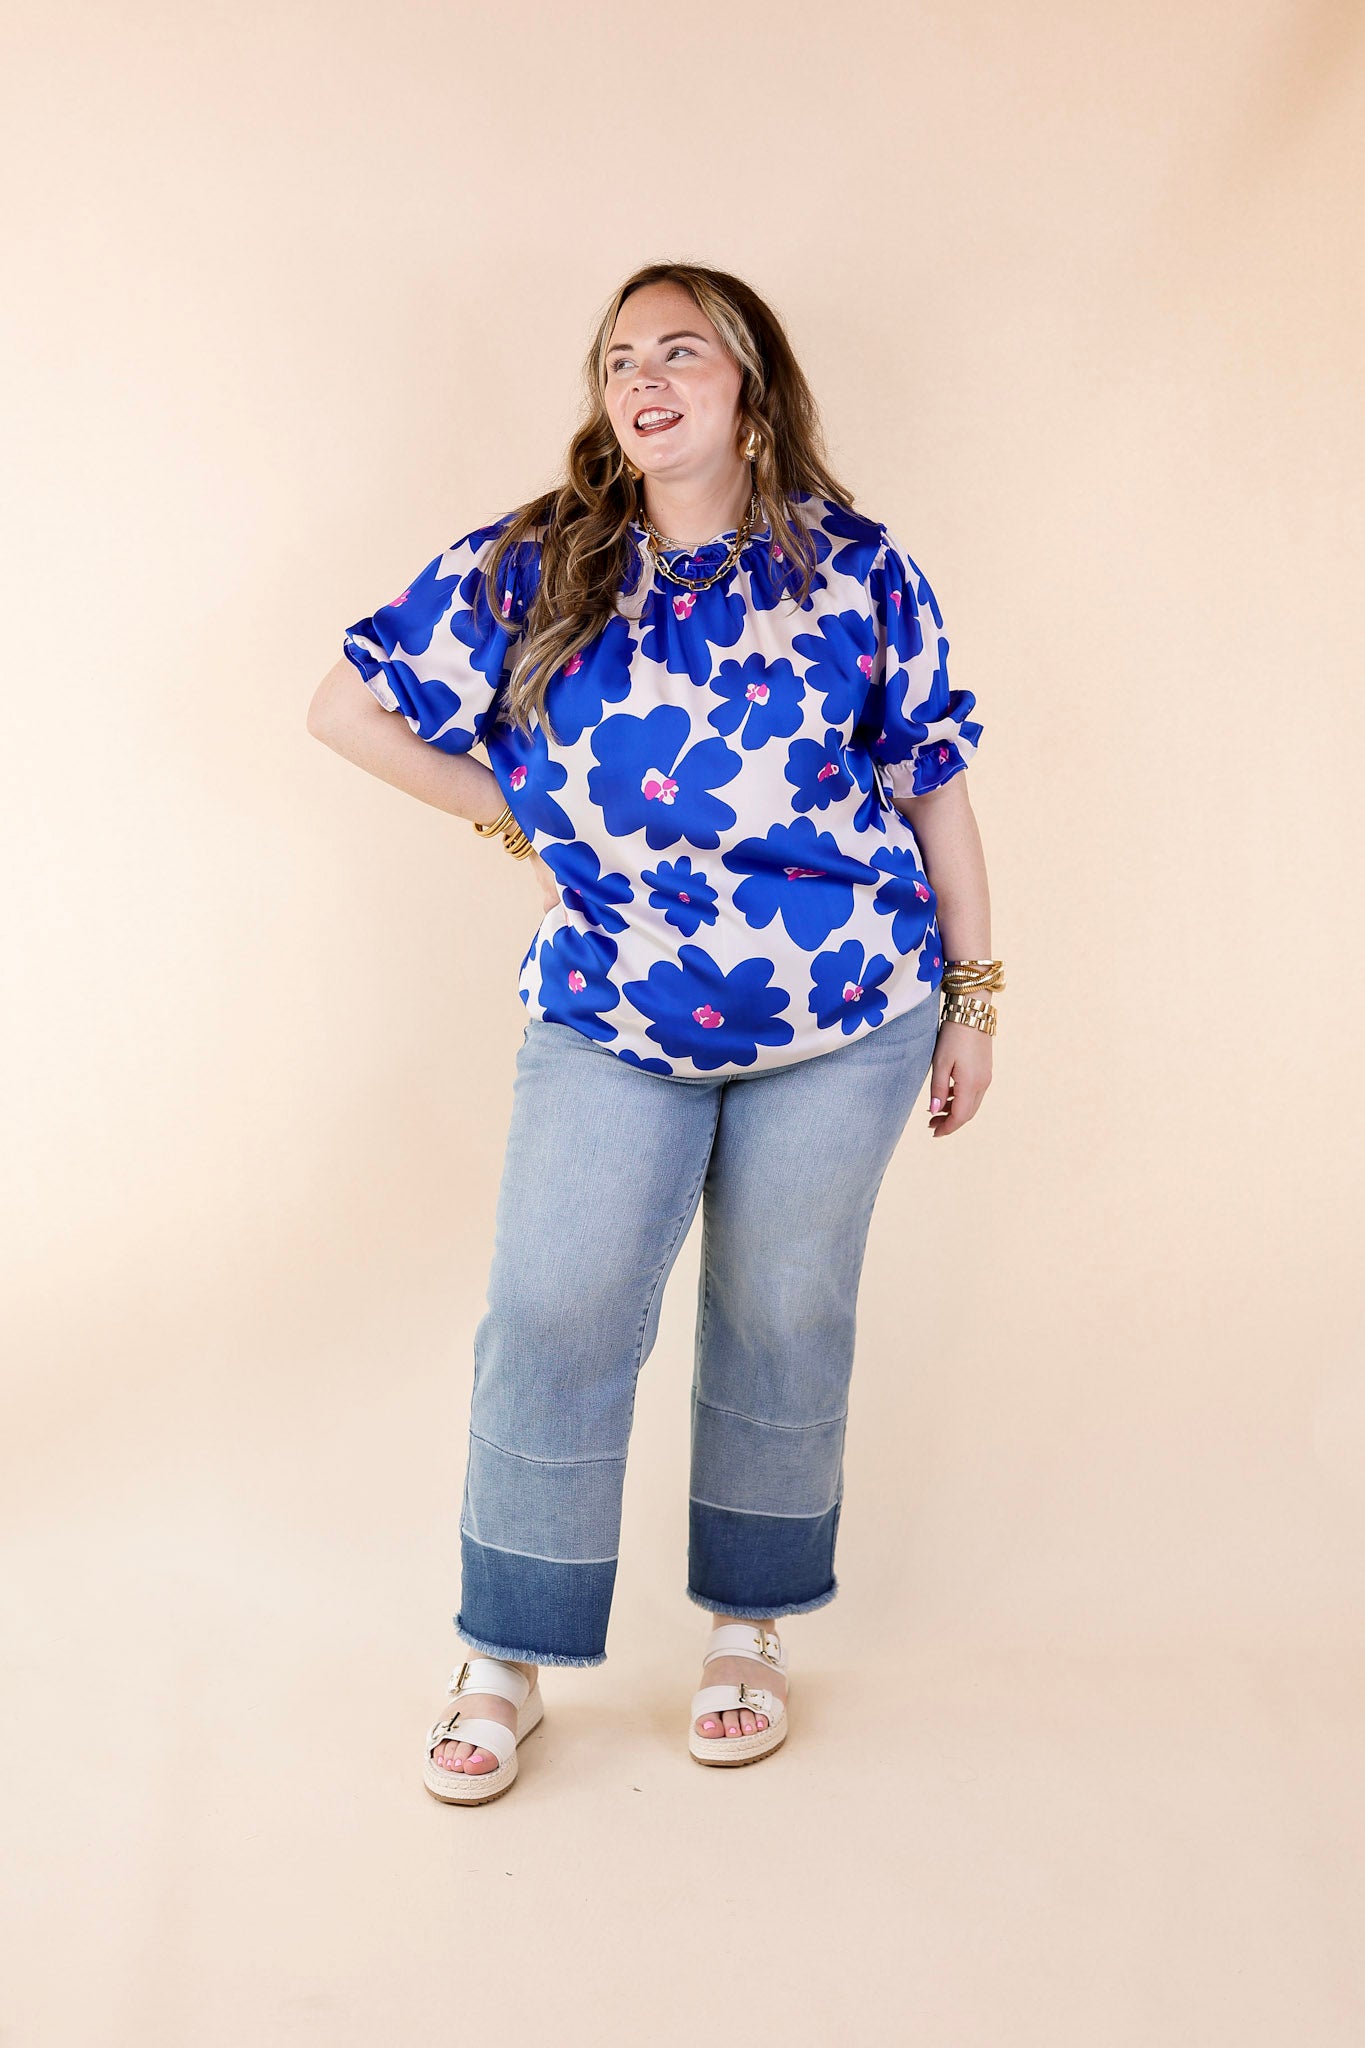 Divine Design Floral Blouse With Puffed Sleeve and Ruffle Neckline in Cobalt Blue - Giddy Up Glamour Boutique